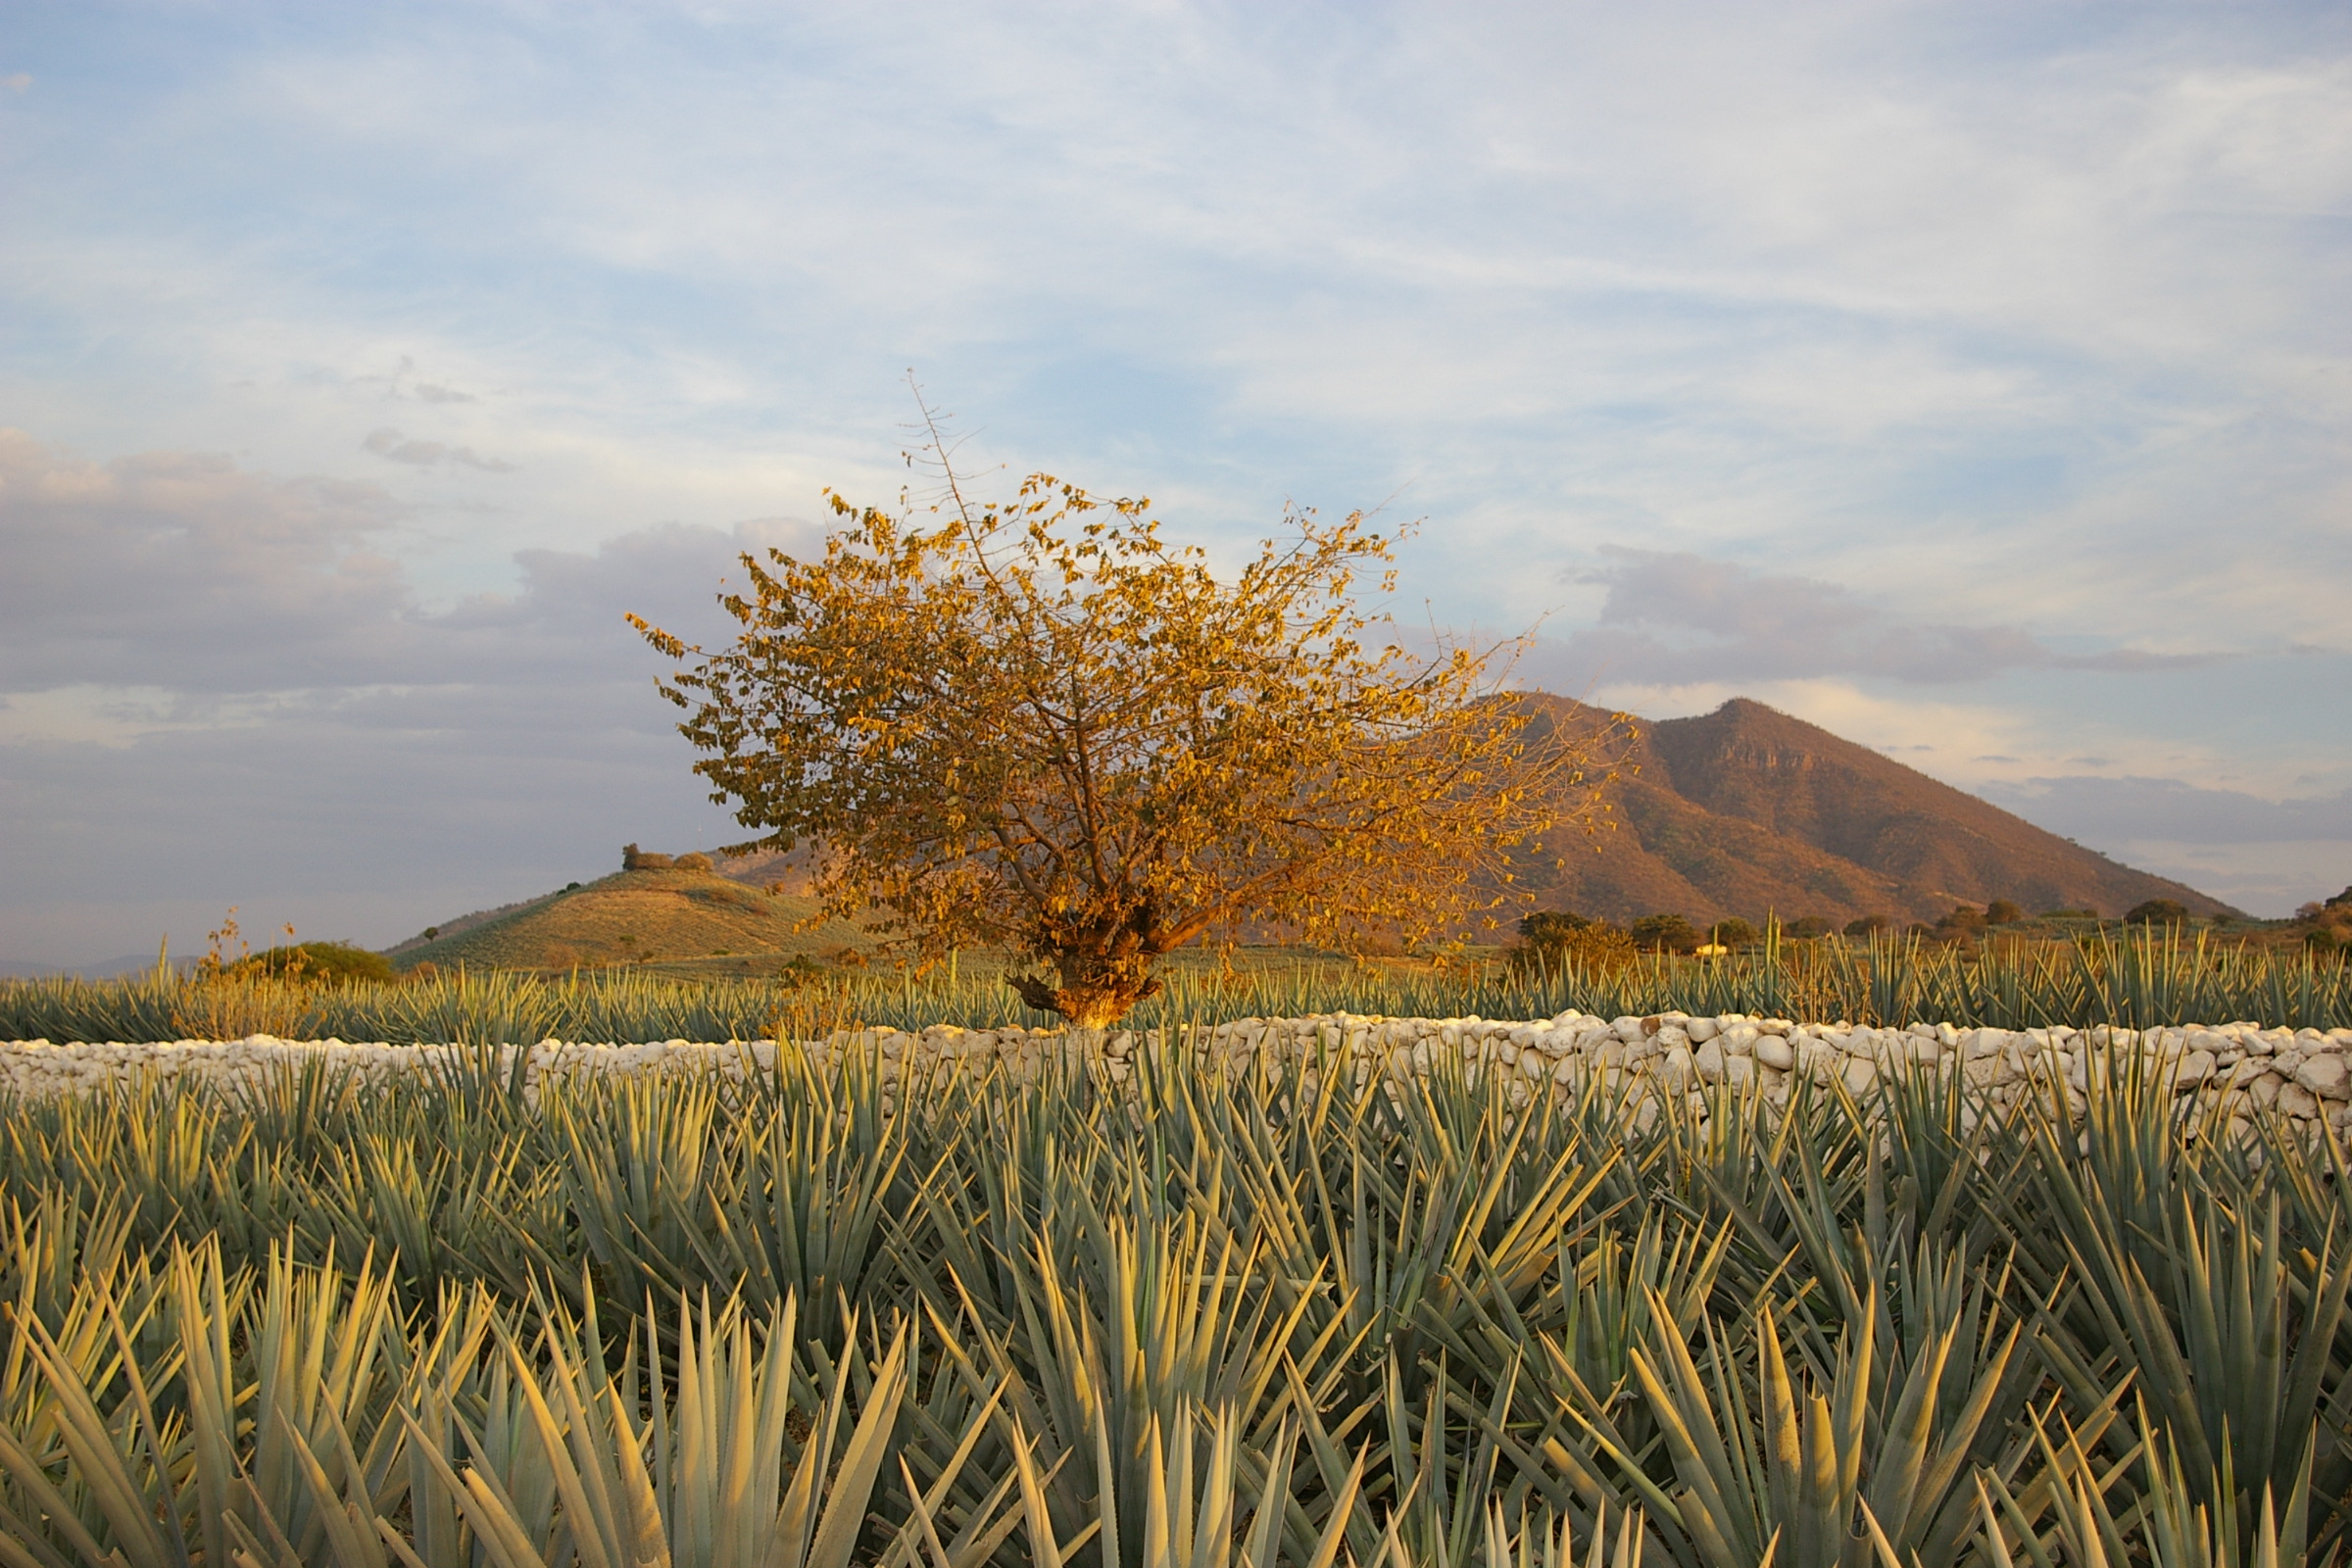 Agave Landscape in Tequila, Jalisco